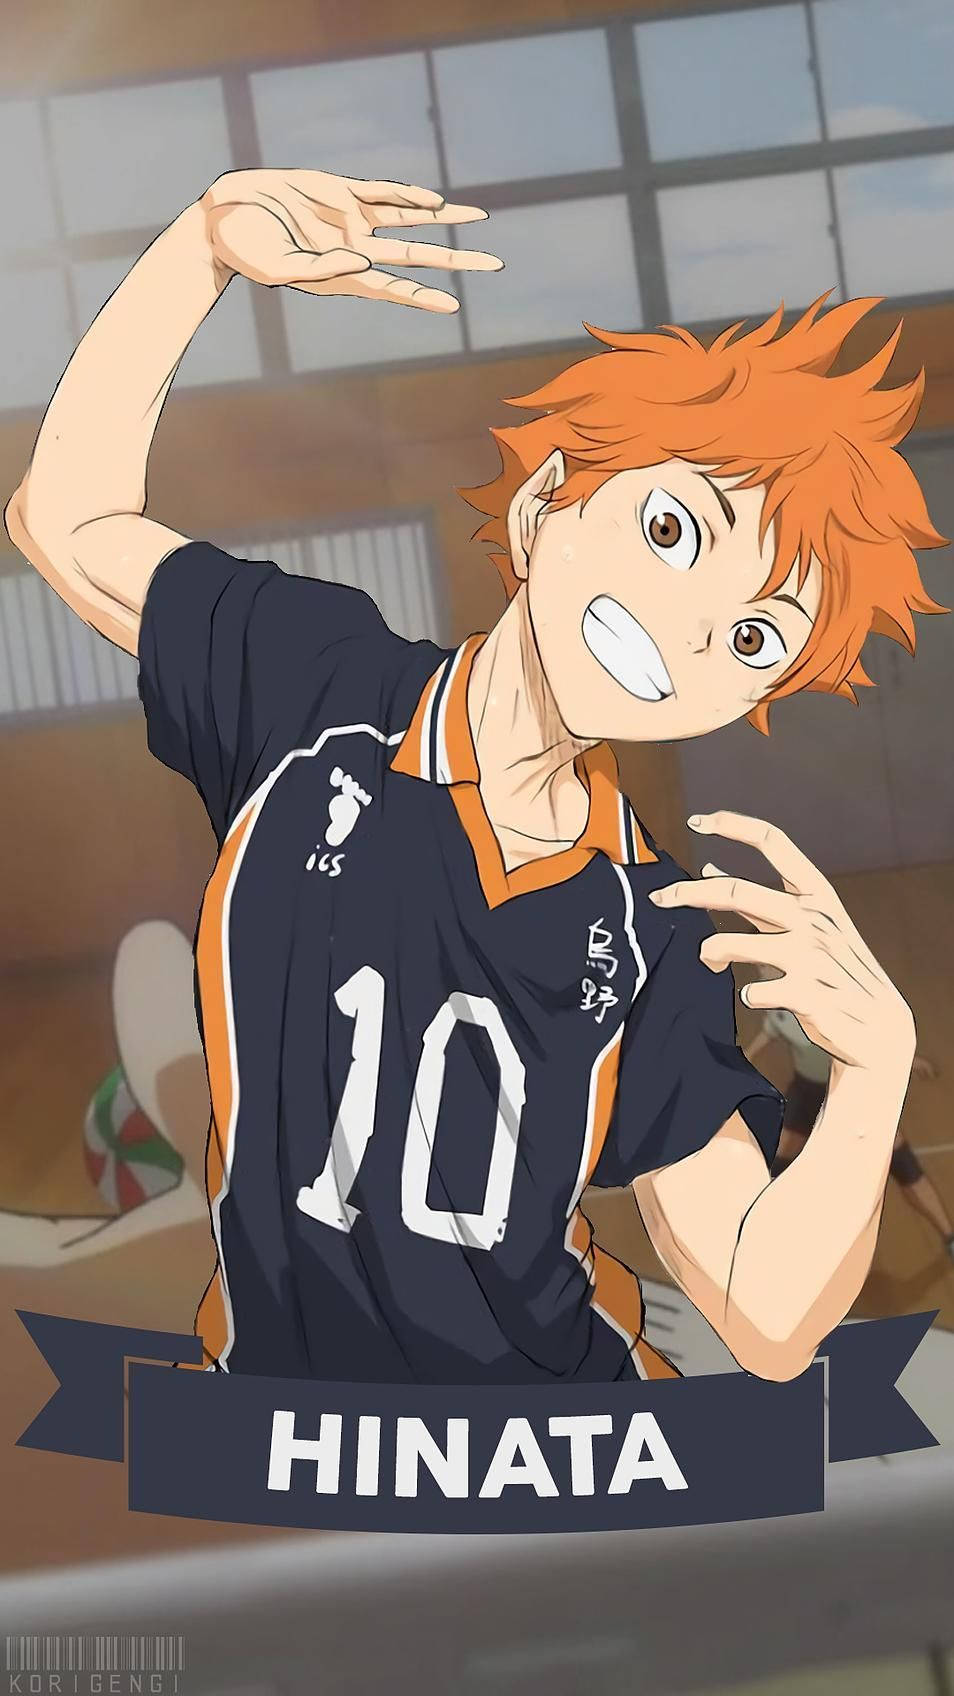 Reach for The Stars with Hinata Shouyou Wallpaper